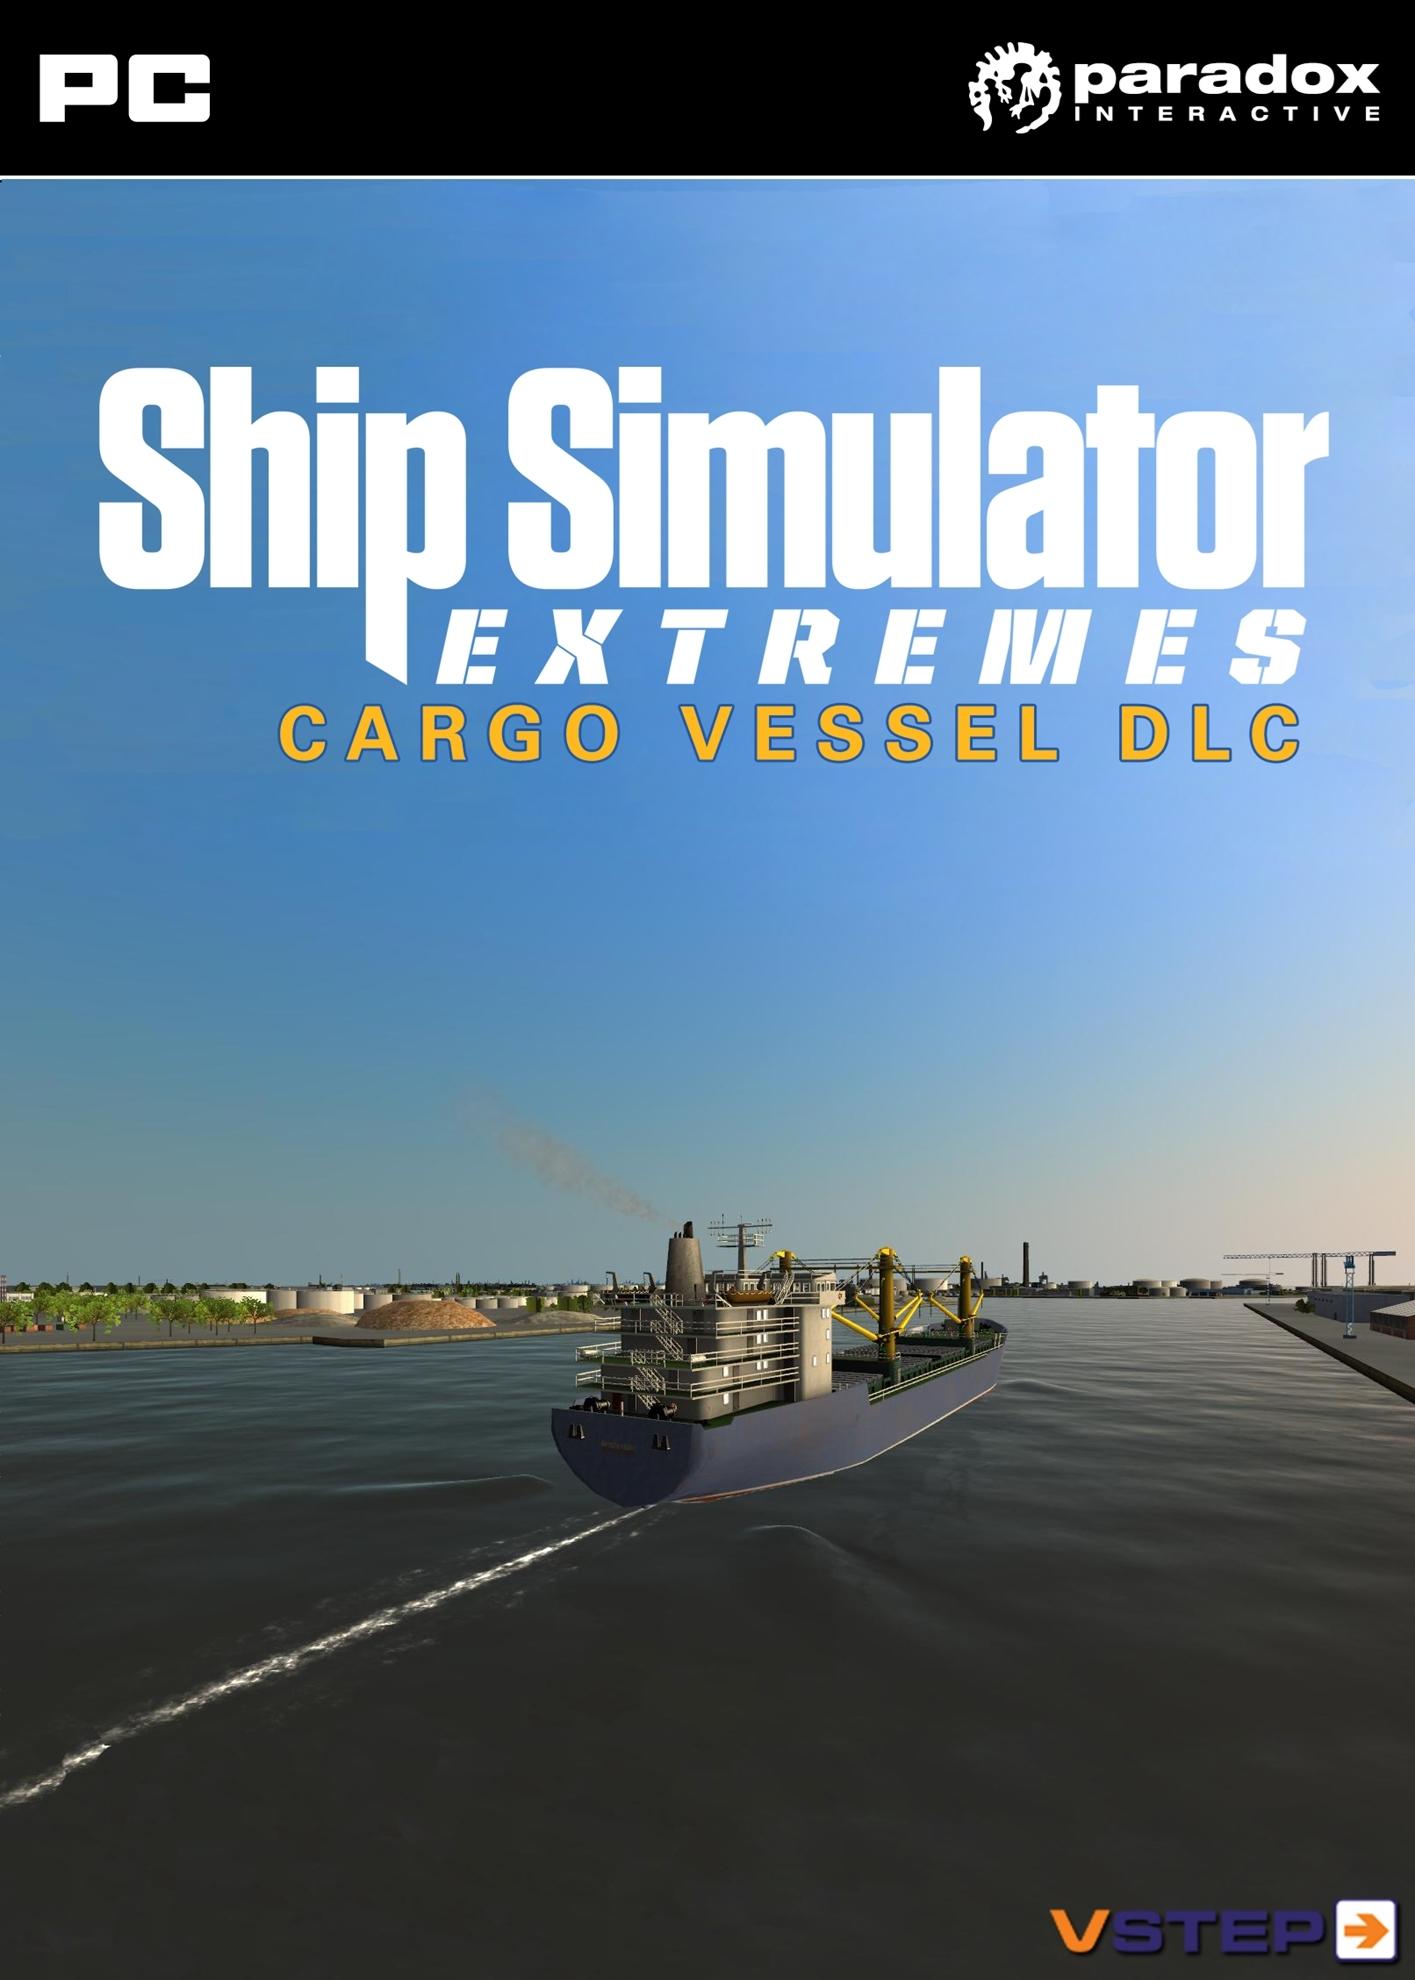 Ship Simulator Extremes: Offshore Vessel DLC